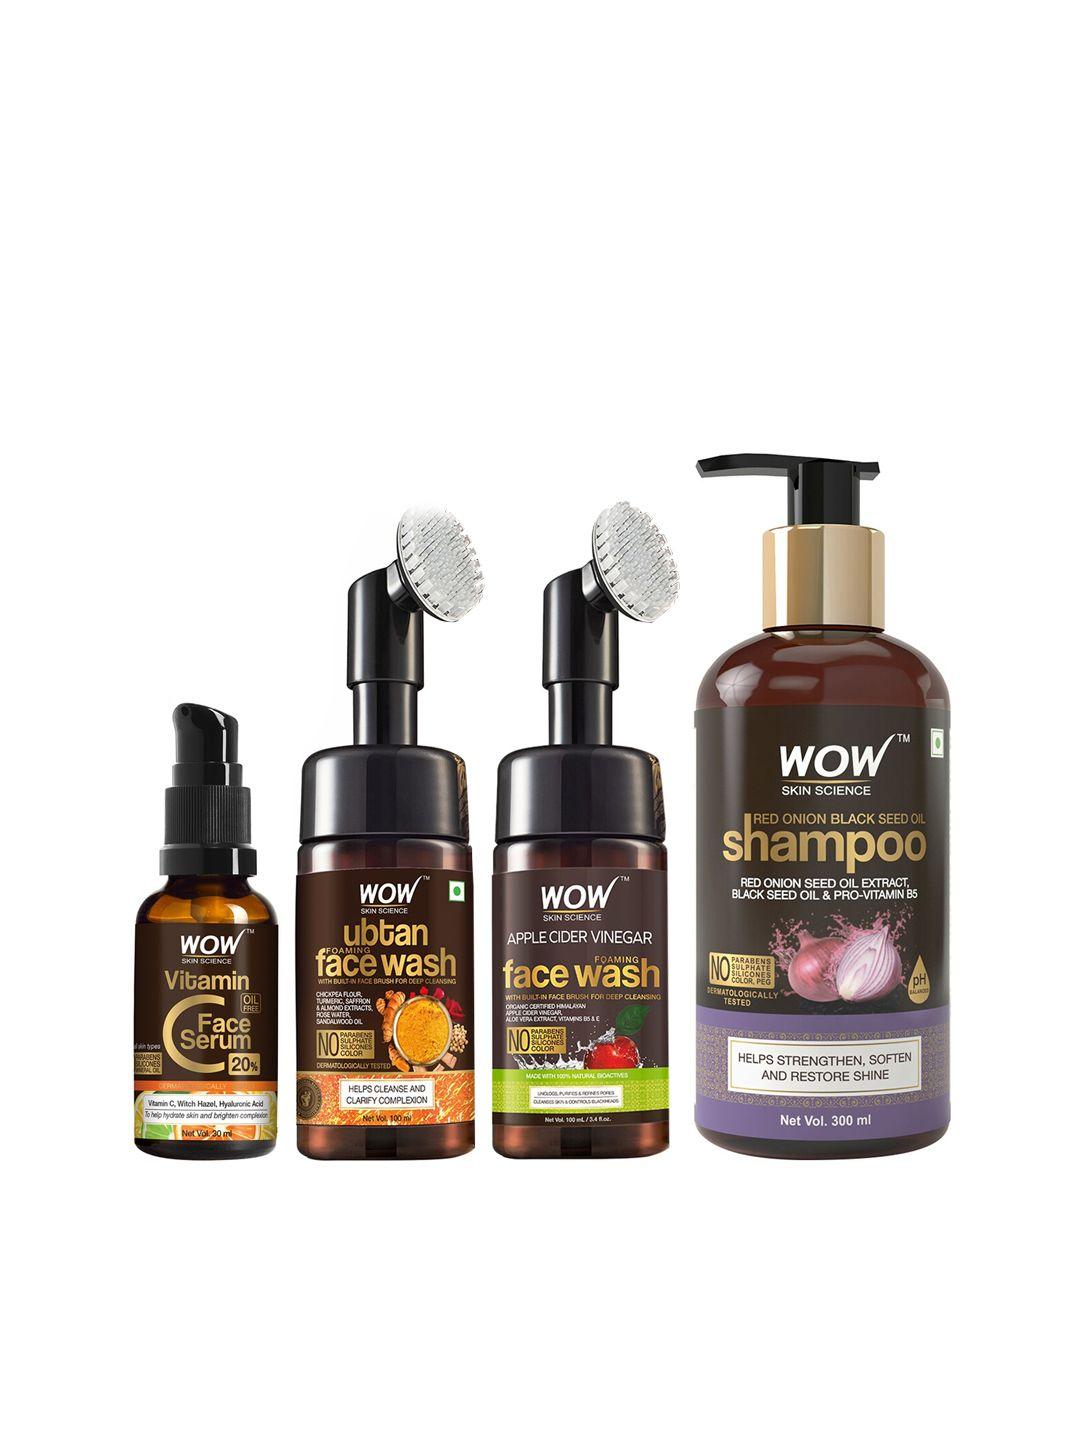 wow skin science set of face serum - shampoo & 2 face wash